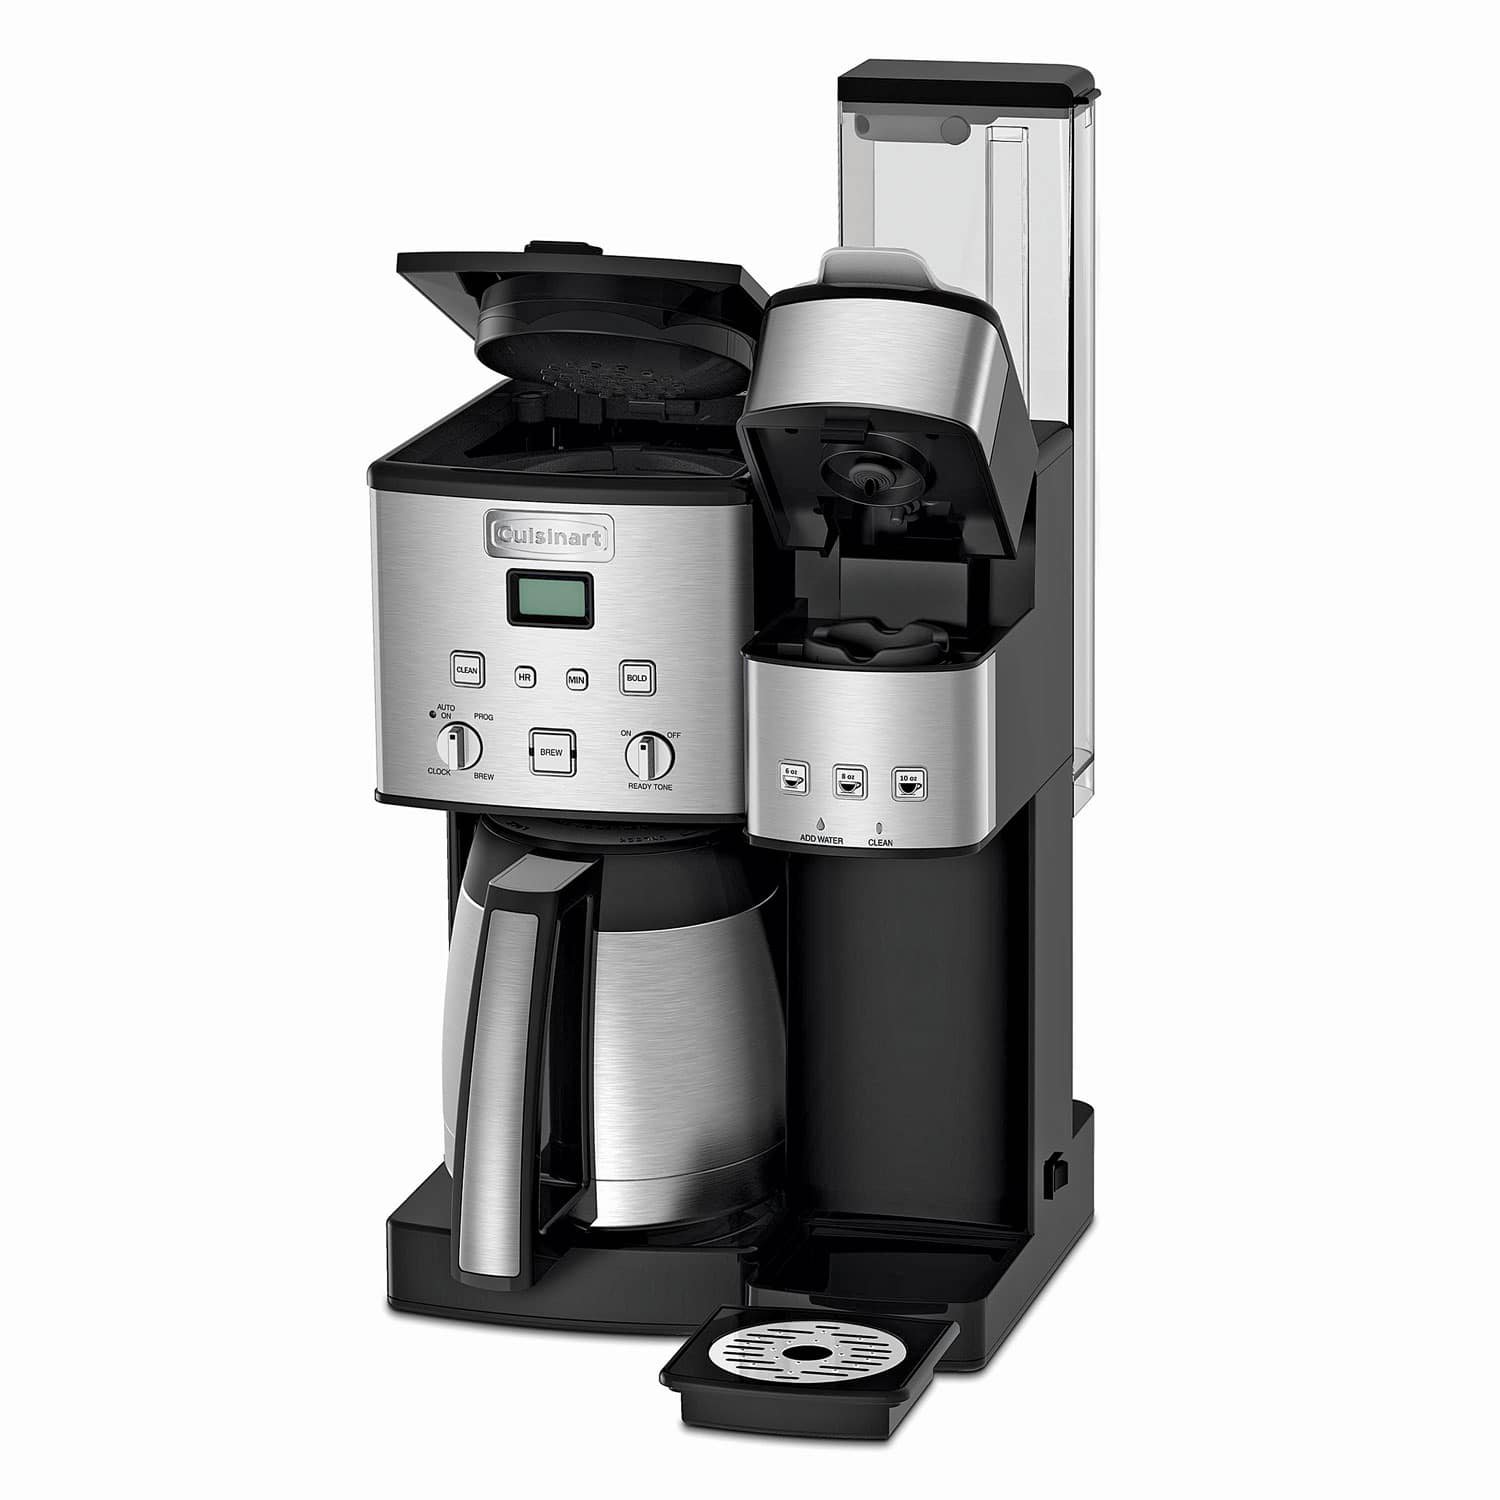 wedding registry ideas Cuisinart Thermal carafe coffee center from Crate and Barrel